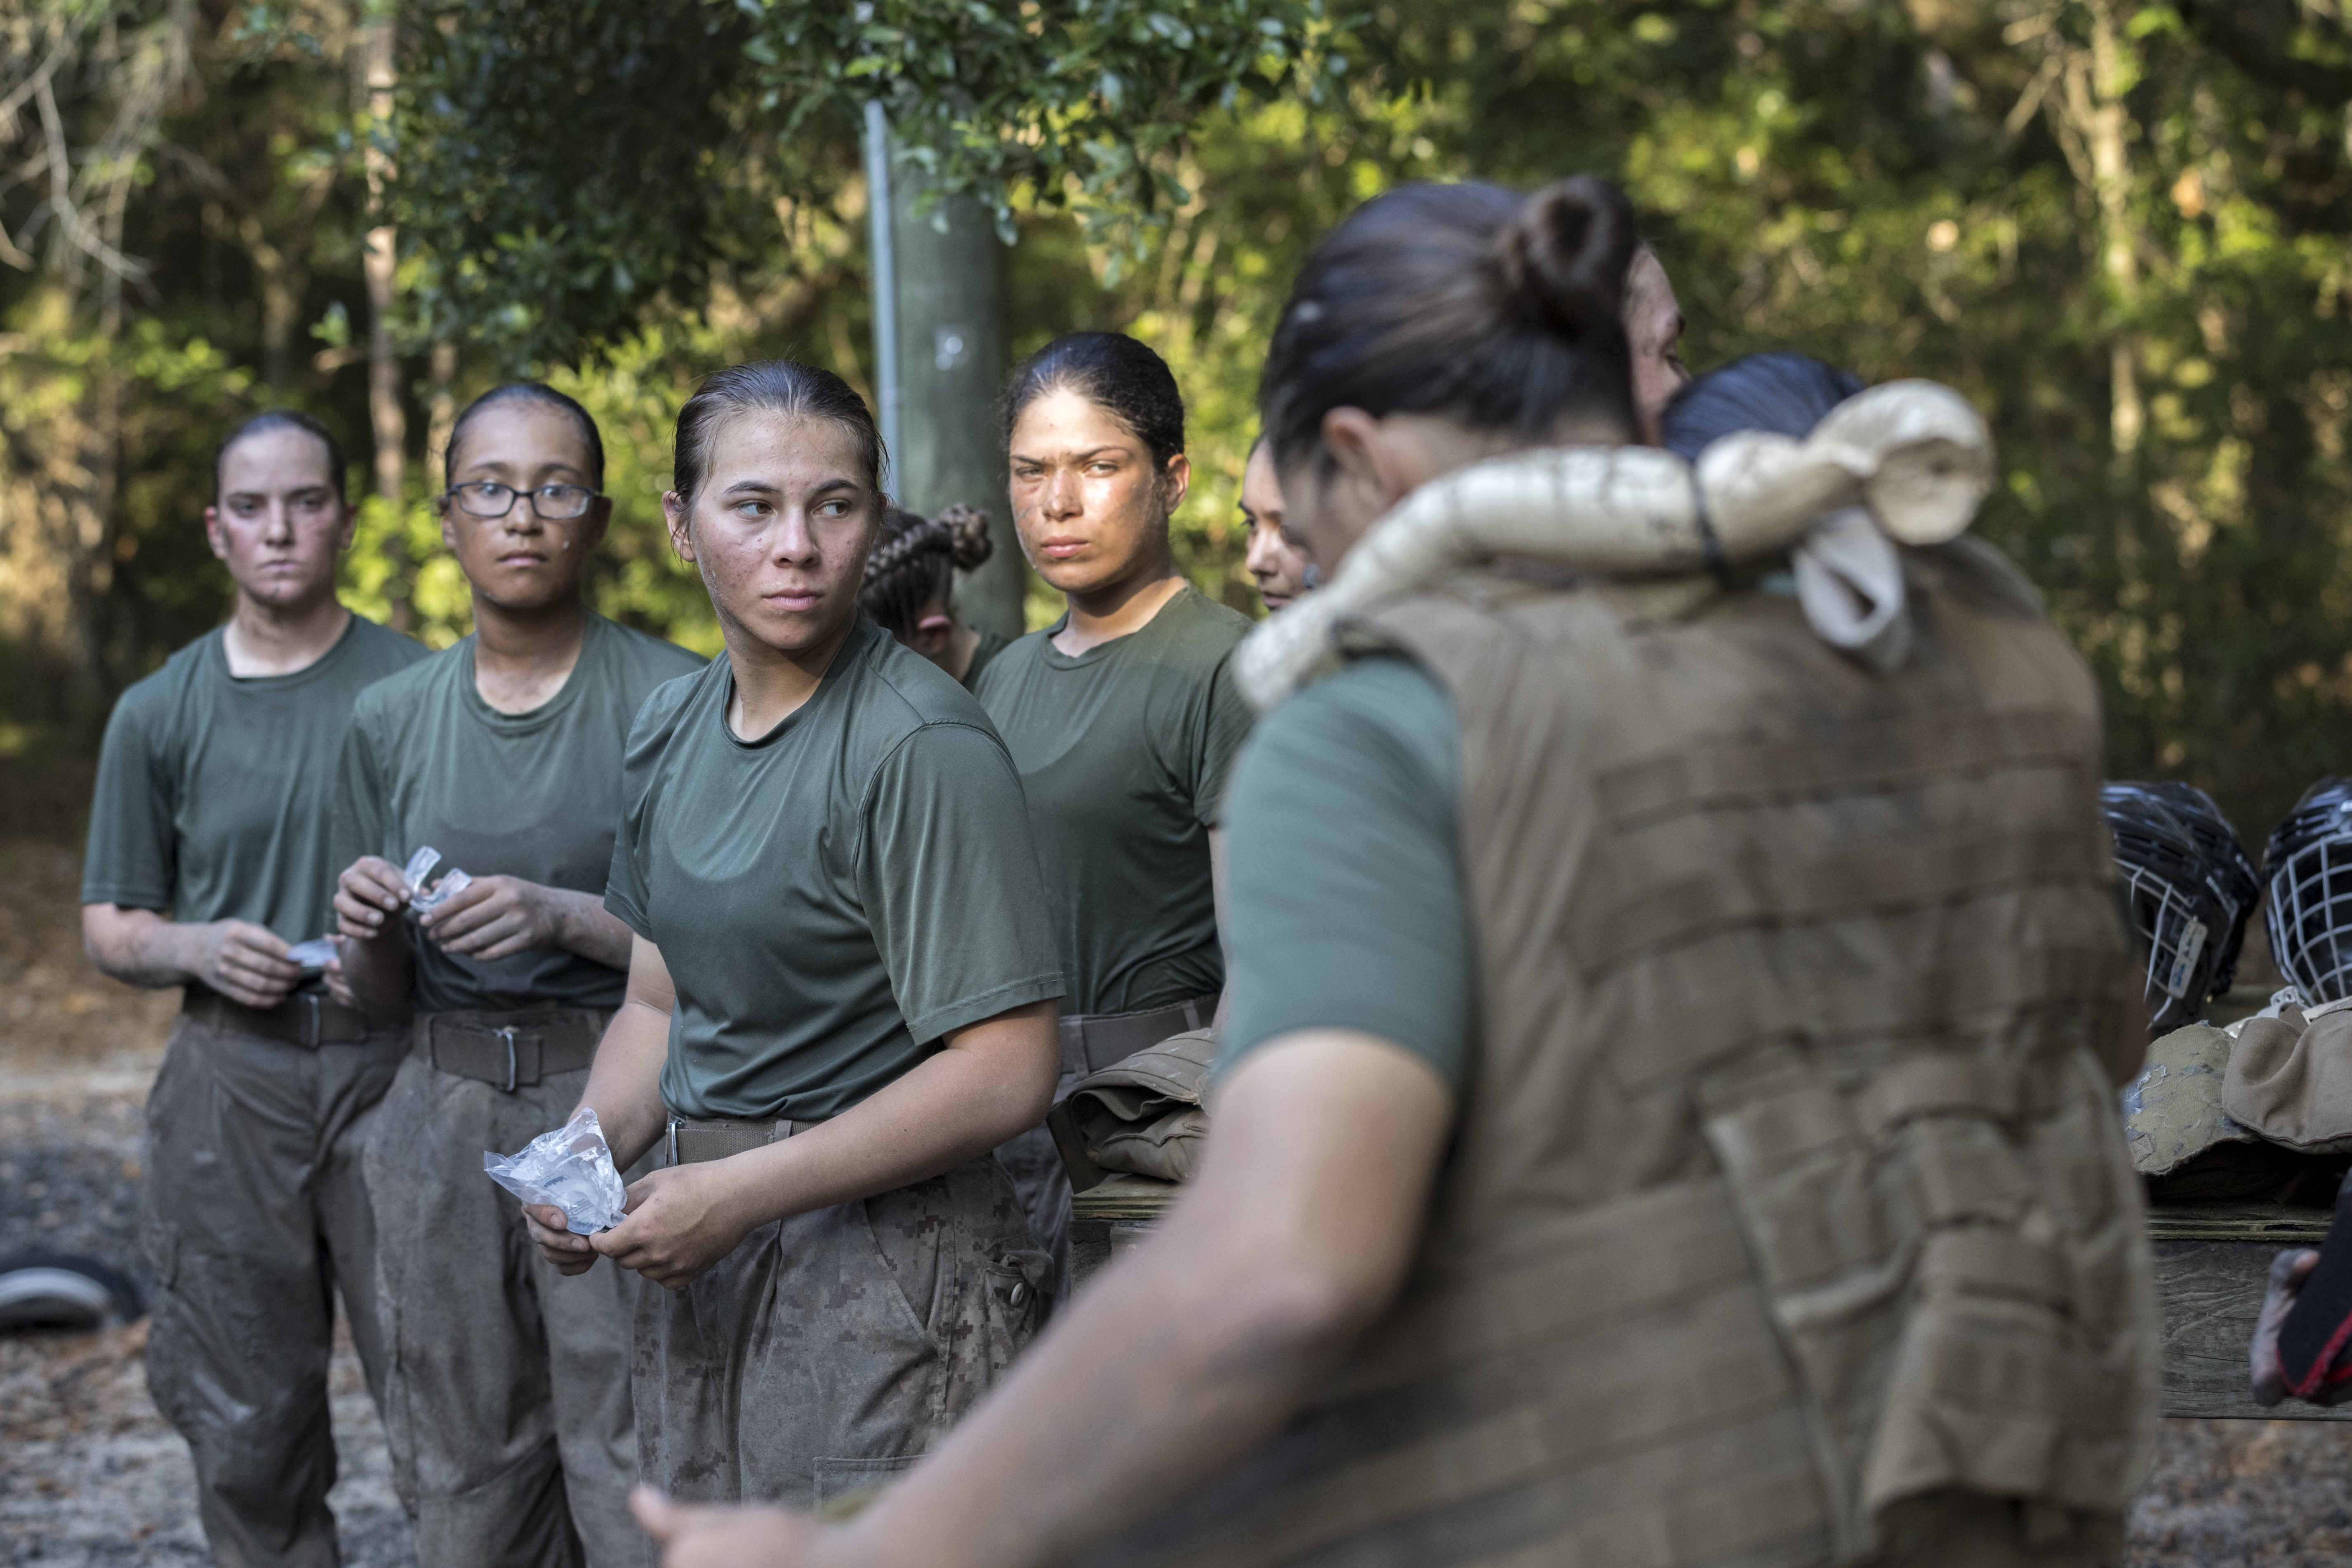 The Marines are moving gradually and sometimes reluctantly to integrate  women and men in boot camp